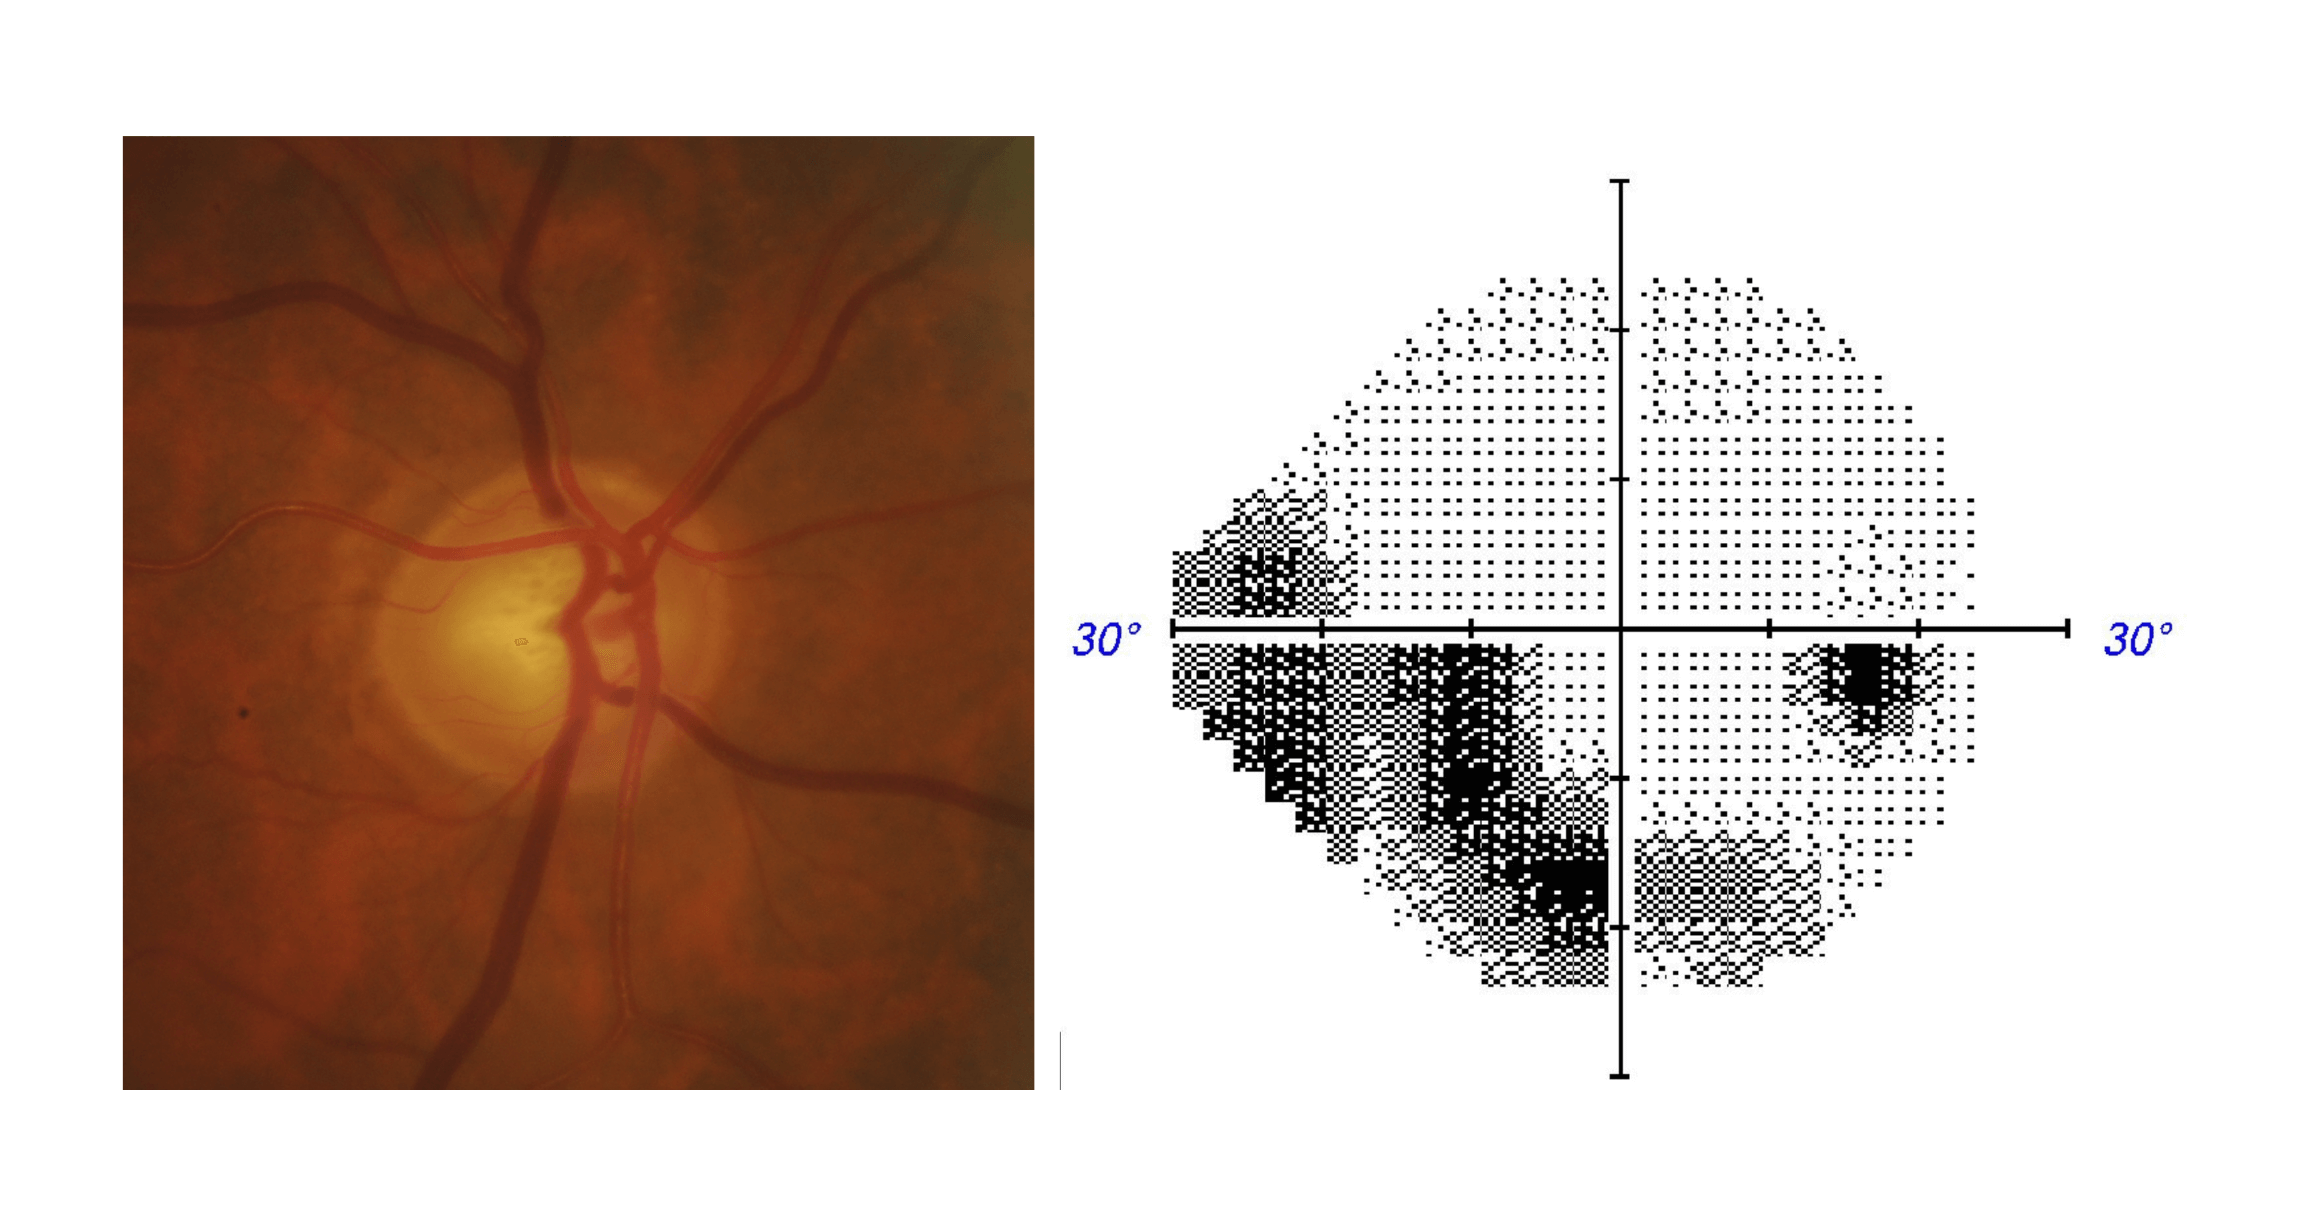 Optic nerve disc photo and visual field test results for an eye with moderate glaucoma